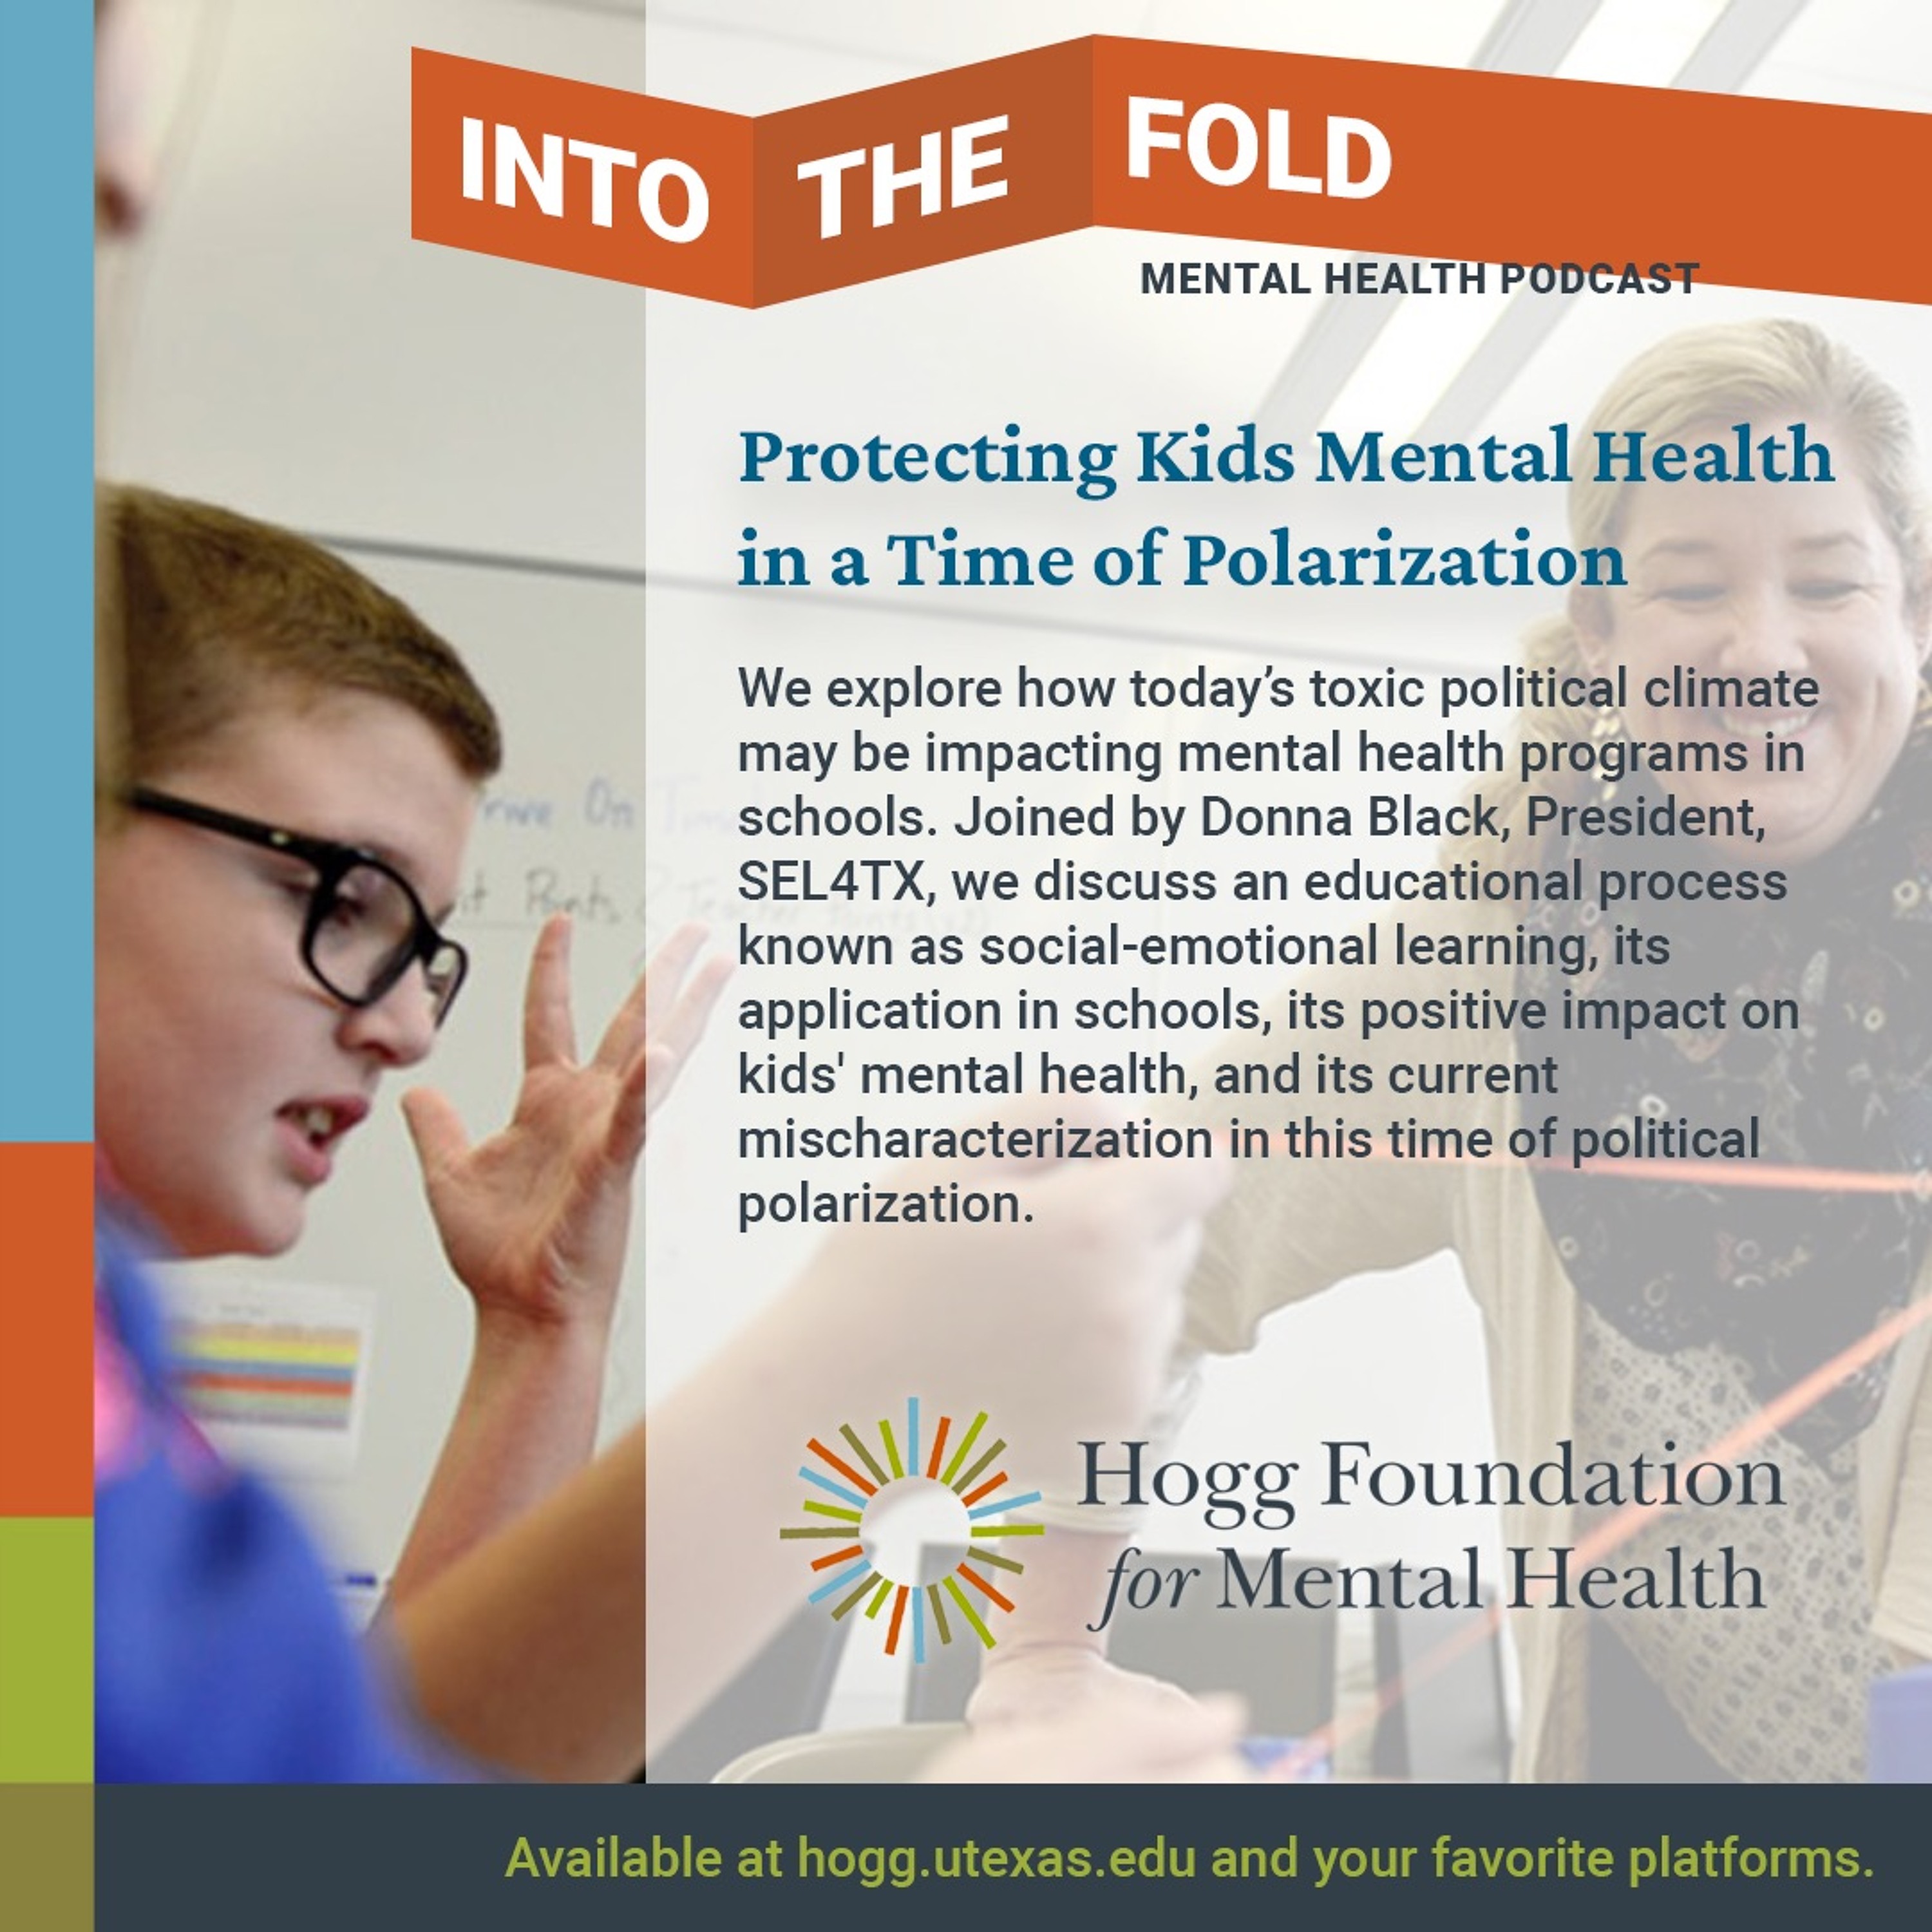 Episode 129: Protecting Kids' Mental Health in a Time of Polarization